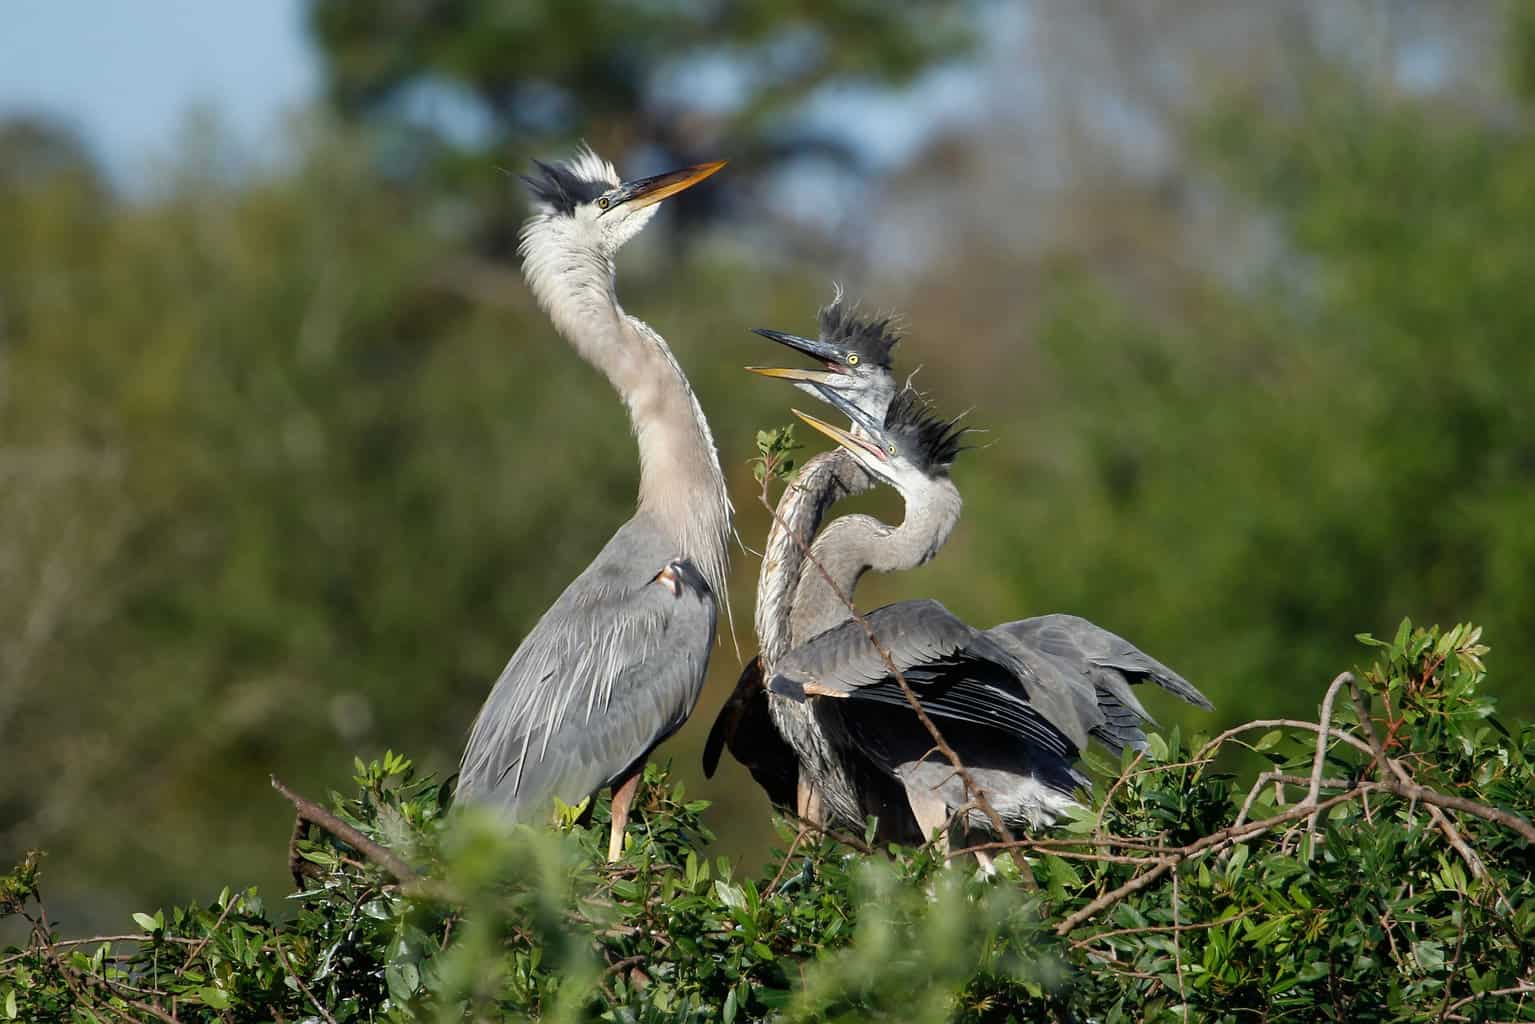 Great blue heron (Ardea herodias) in the nest with chicks